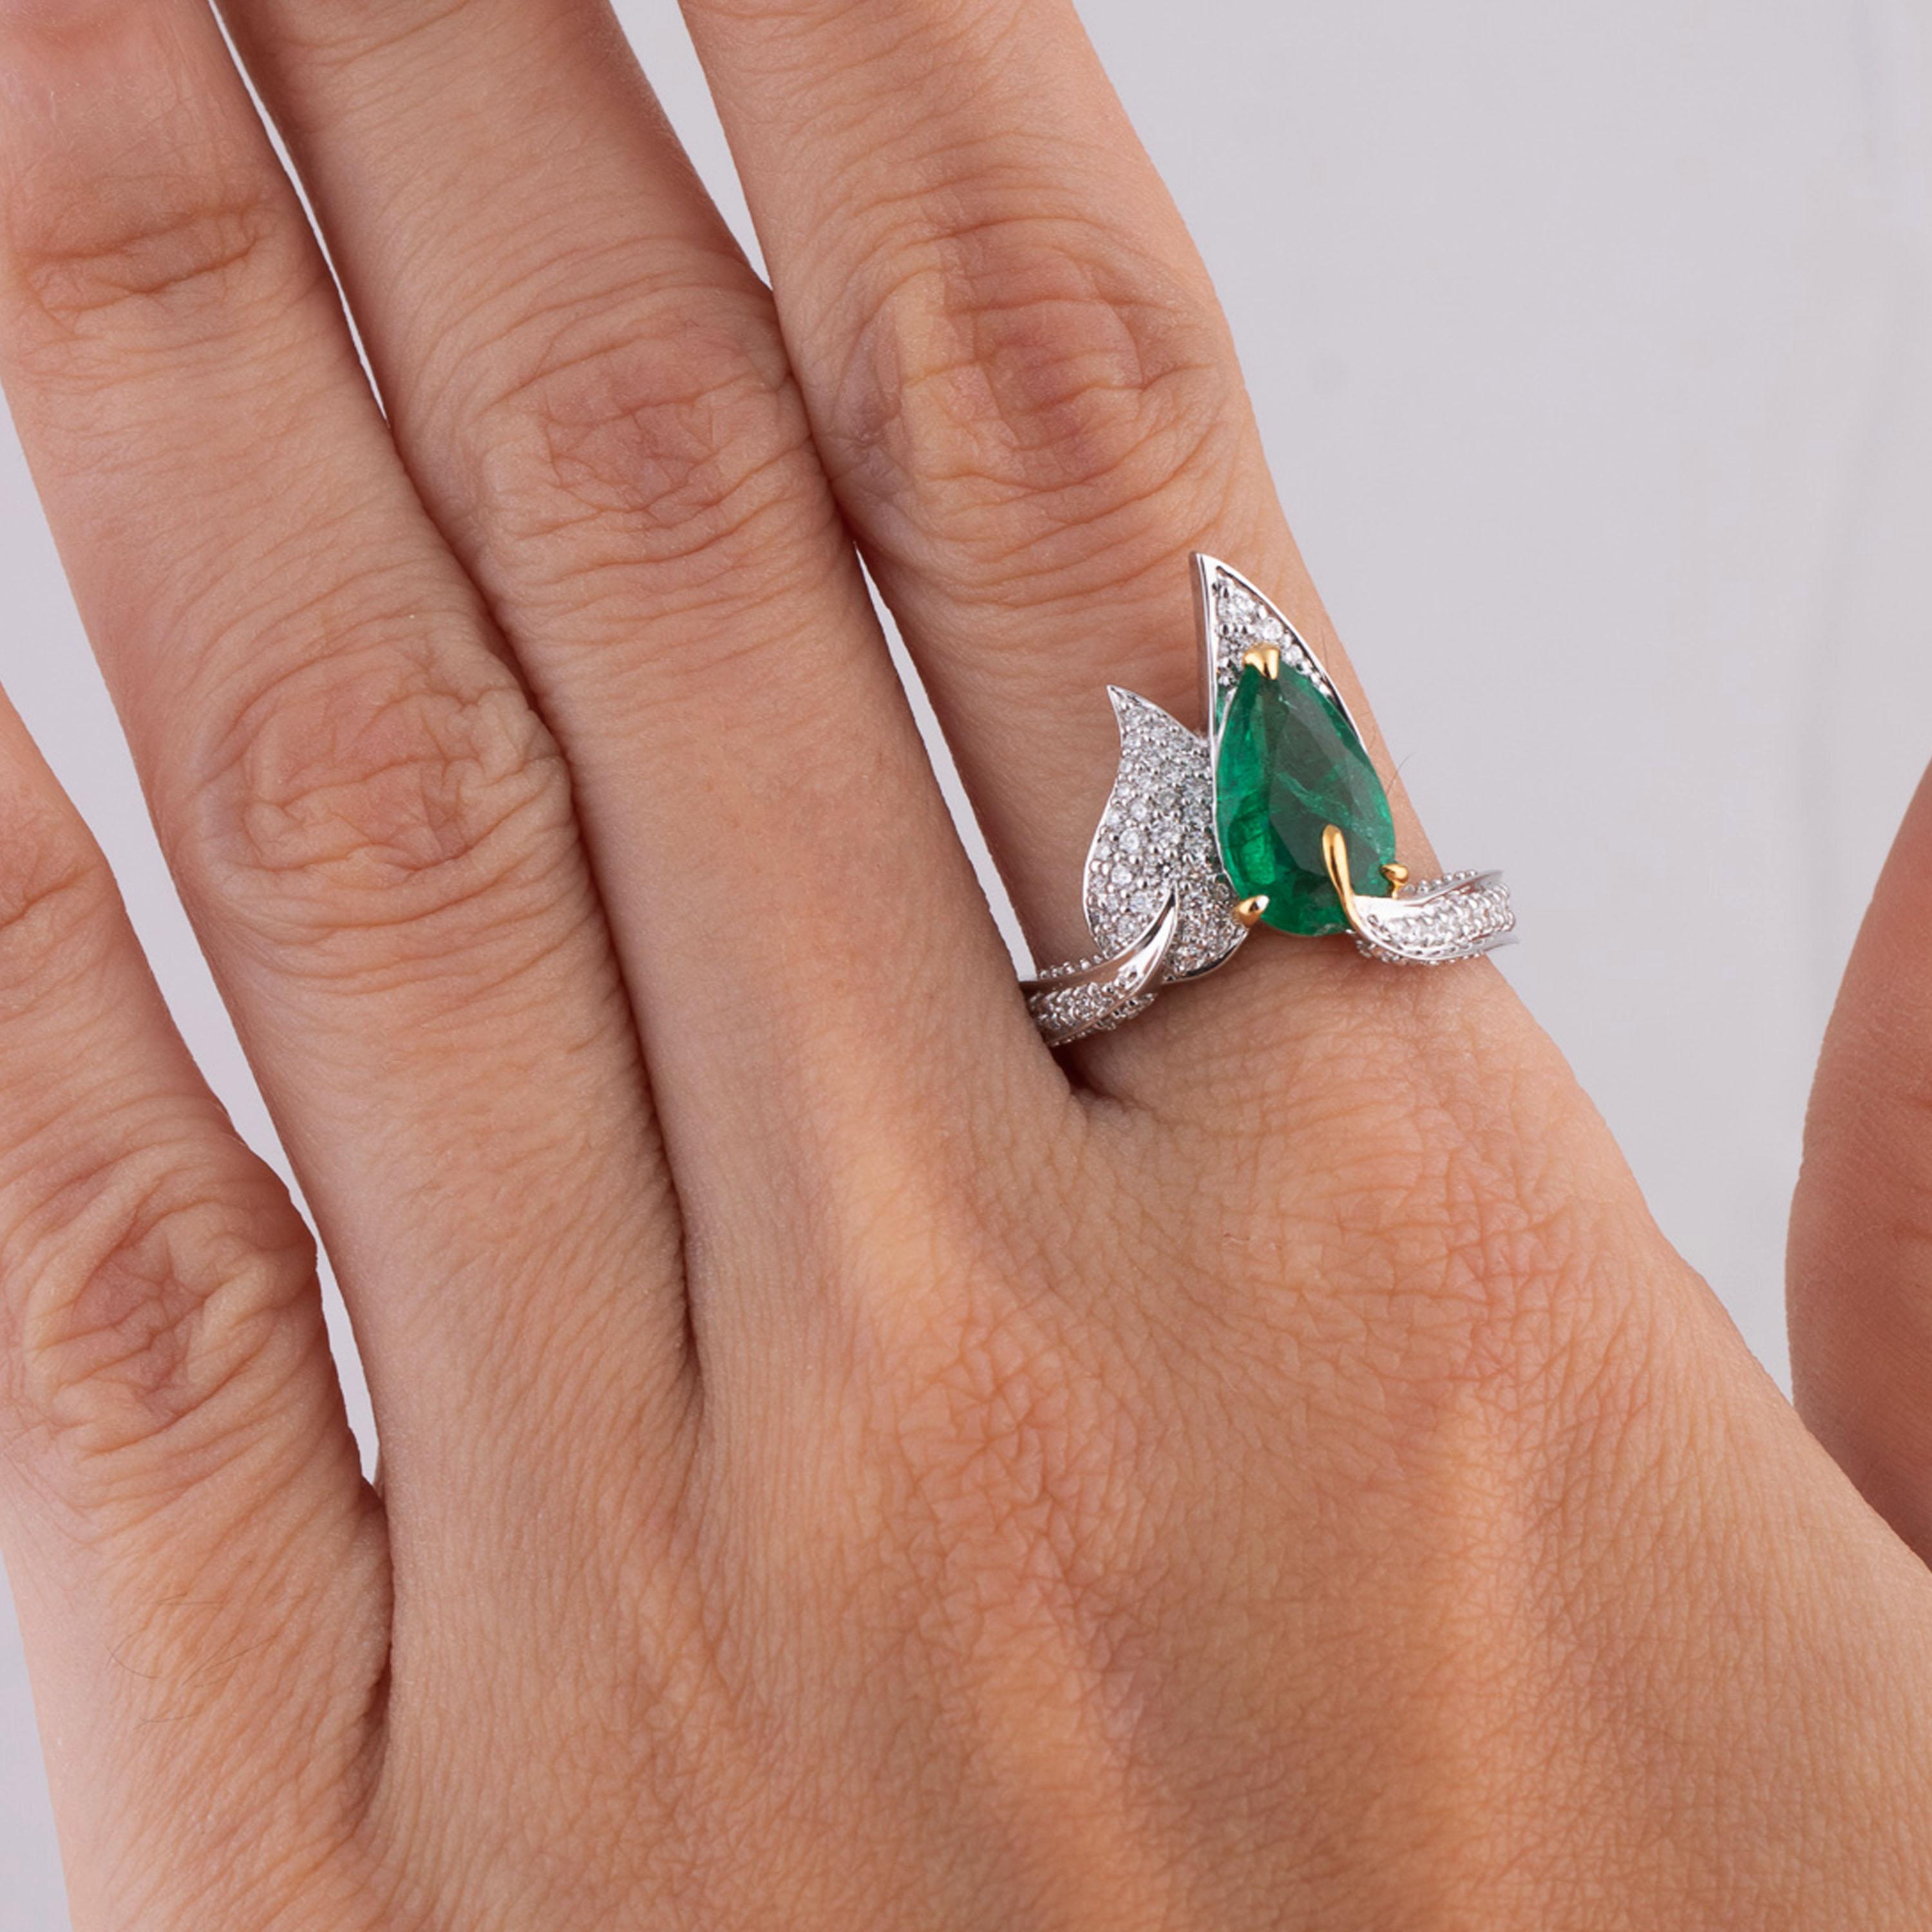 Gross Weight: 5.75 Grams
Diamond Weight: 0.42 cts
Emerald Weight: 1.68 cts
Ring Size: US 6.5 (Resizing Can be Done)
IGI Certified

Video of the product can be shared on request.

This diamond and emerald cocktail ring is a must have for nature